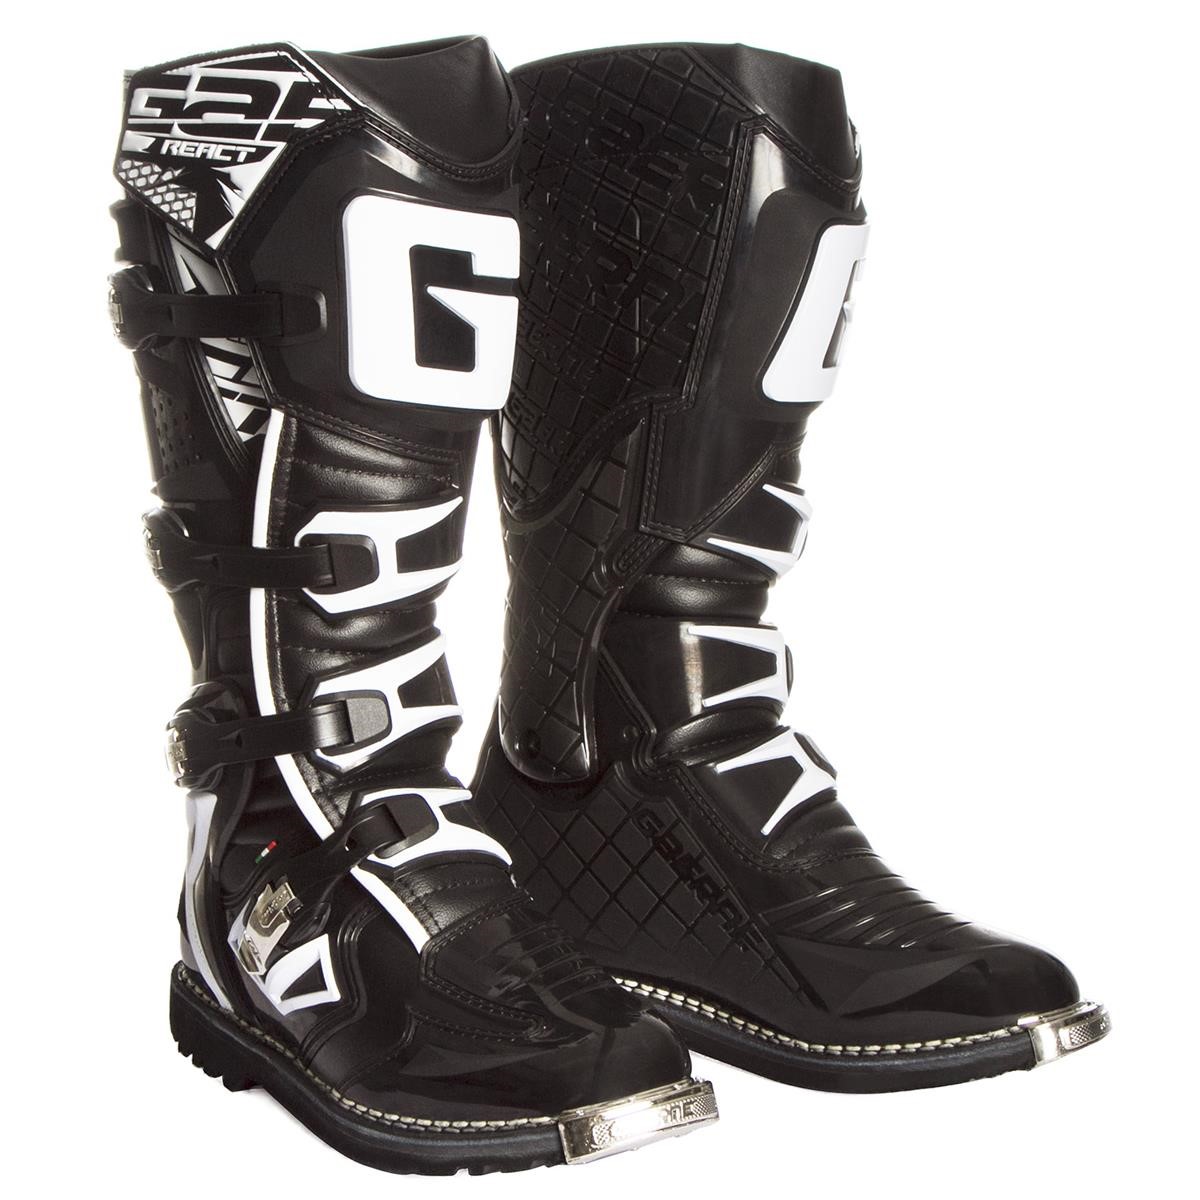 Gaerne Motocross Boots Size Chart